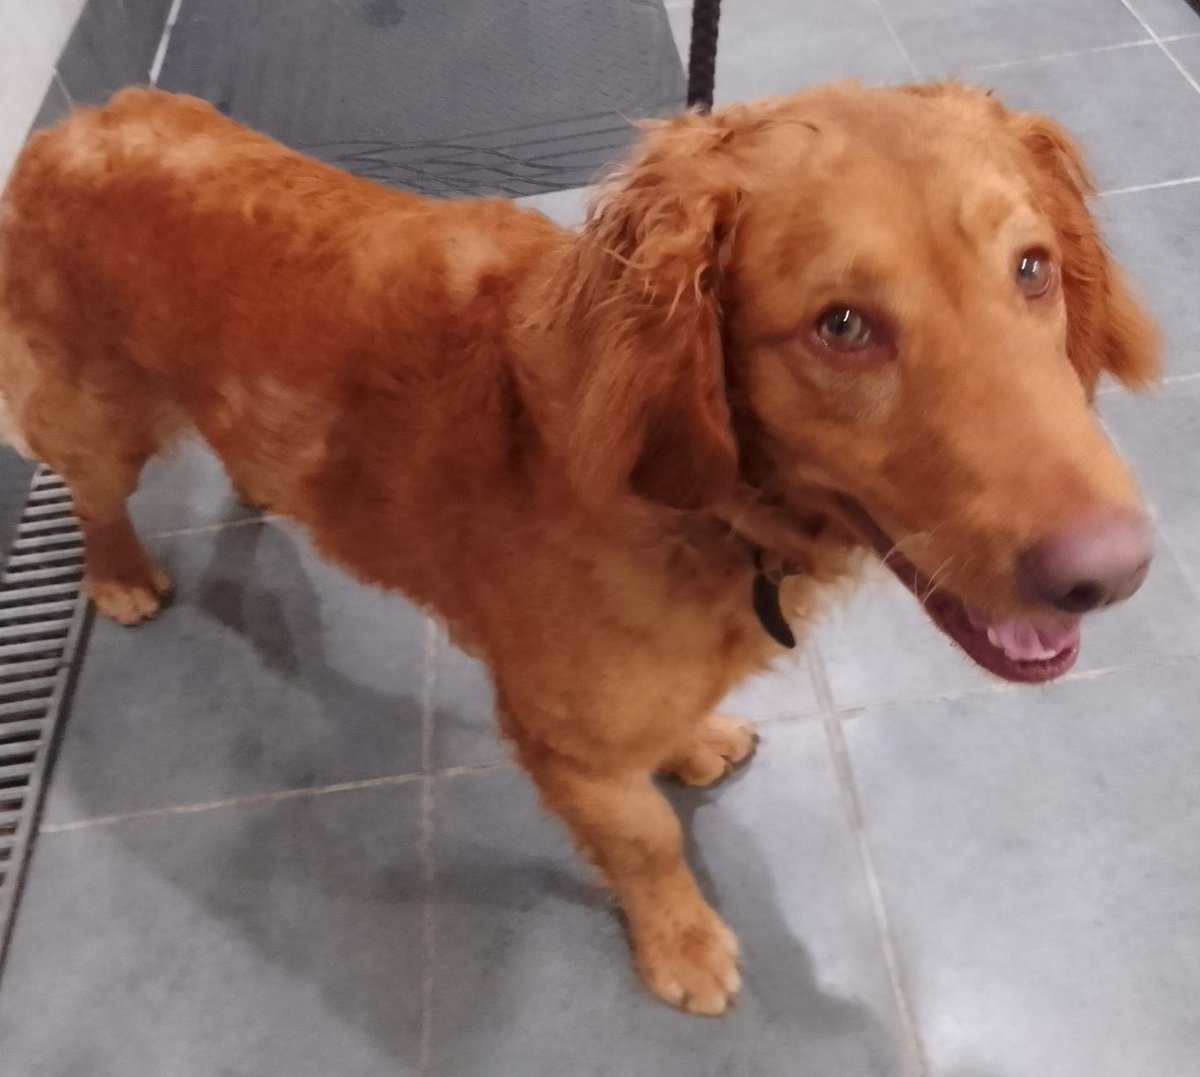 PLEASE REWEET TO HELP FIND THE OWNER OR A RESCUE SPACE FOR THIS STRAY DOG FOUND #MILTONKEYNES #BUCKINGHAMSHIRE #UK . Male Retriever Cross, white on chest and paws. CHIP NOT REGISTERED, found April 18. He could be missing or stolen from another region, please share widely. Proof